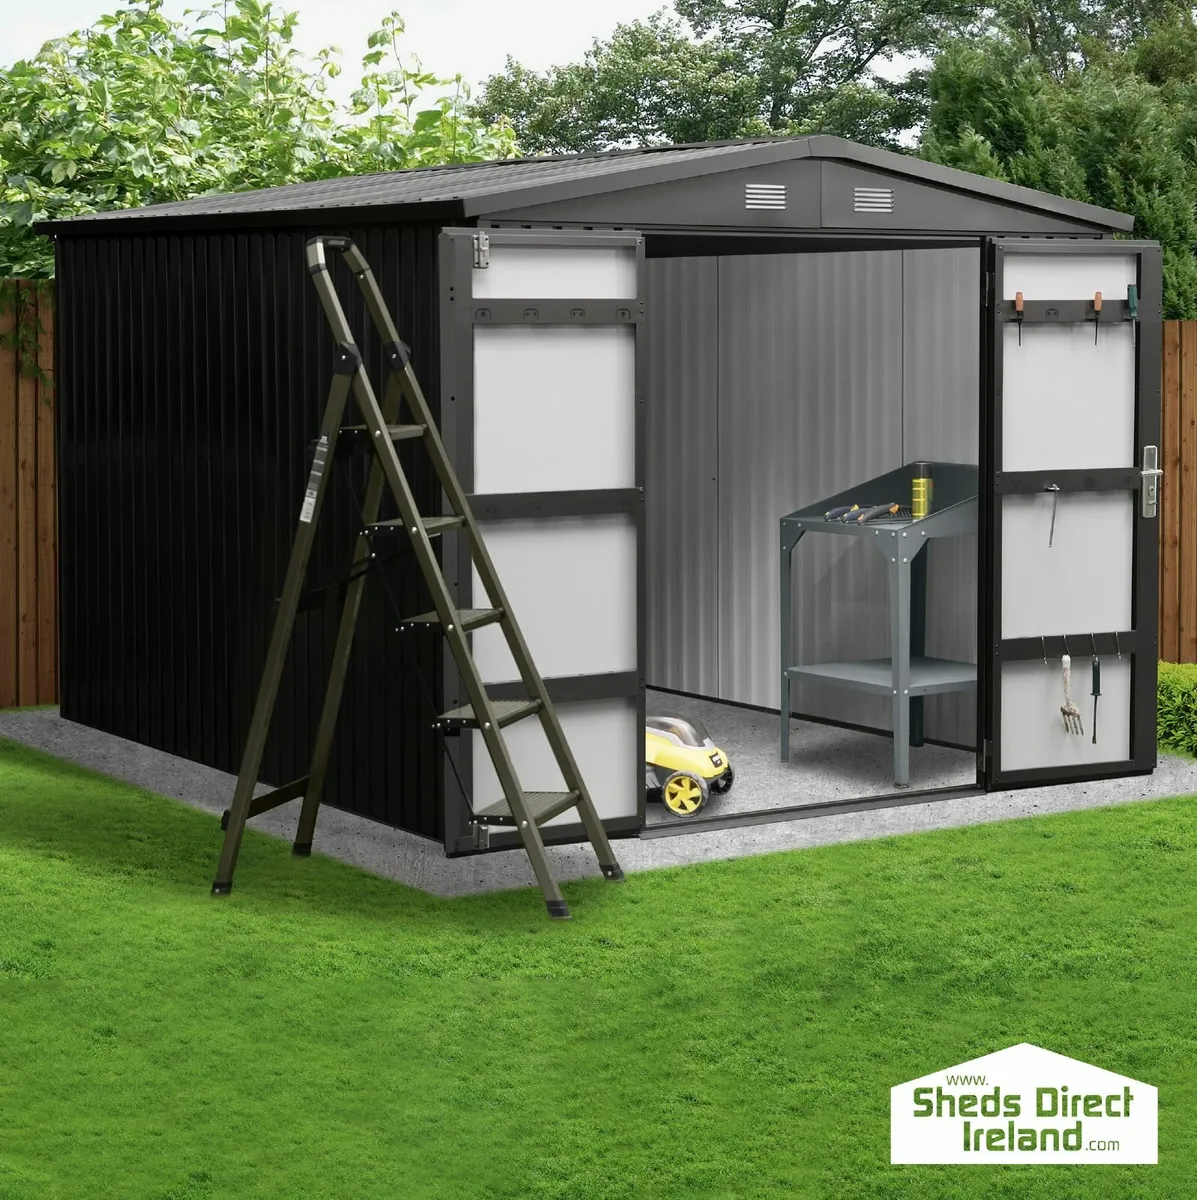 The Premium 8ft x 10ft Steel Garden Shed